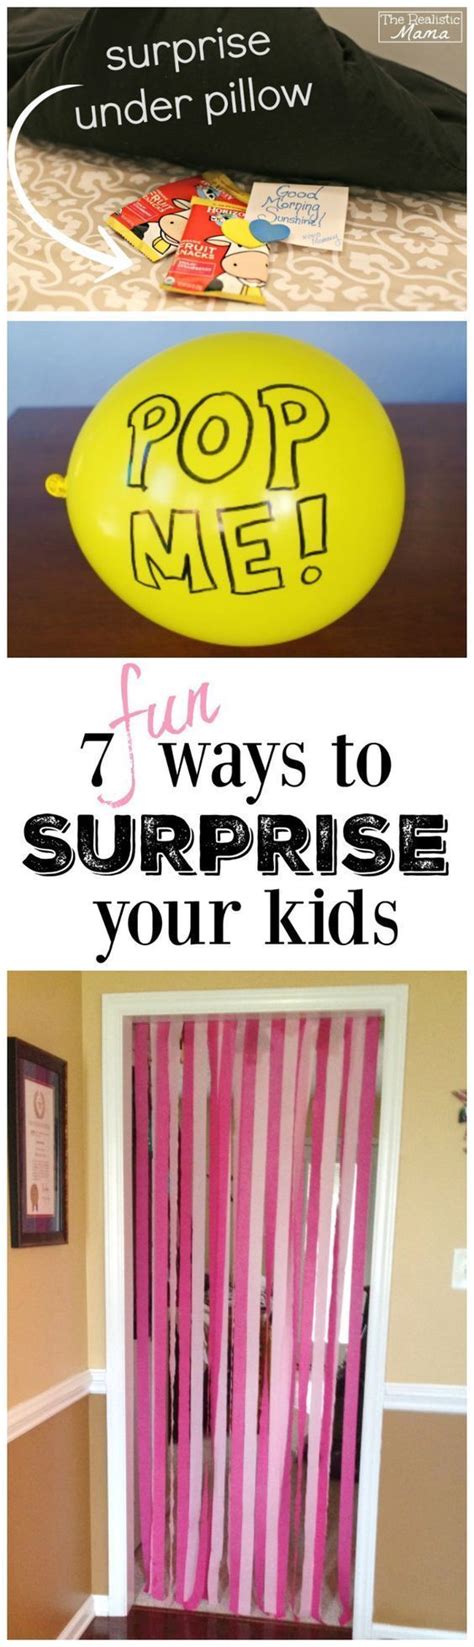 7 Fun Ways To Surprise Your Kids The Realistic Mama Kids Kids And